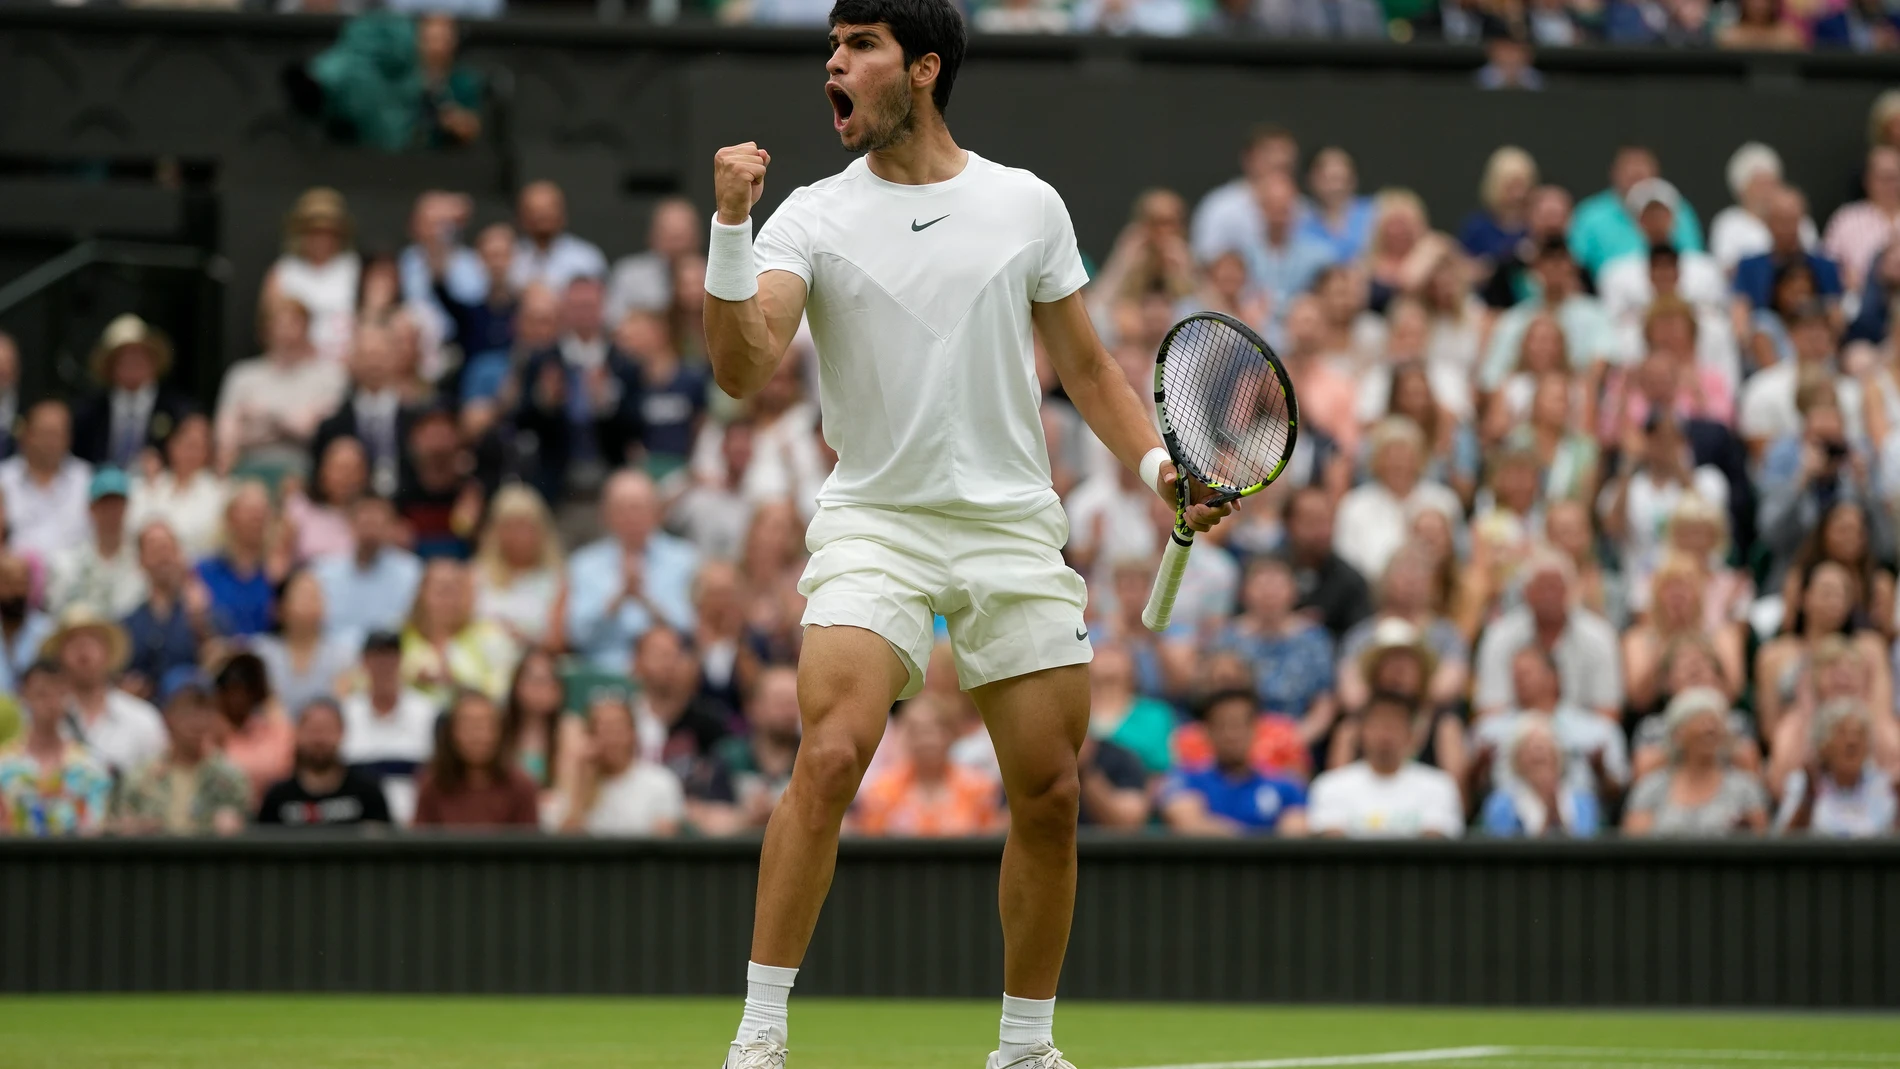 Spain's Carlos Alcaraz reacts after winning a point against Chile's Nicolas Jarry in a men's singles match on day six of the Wimbledon tennis championships in London, Saturday, July 8, 2023. (AP Photo/Alastair Grant)